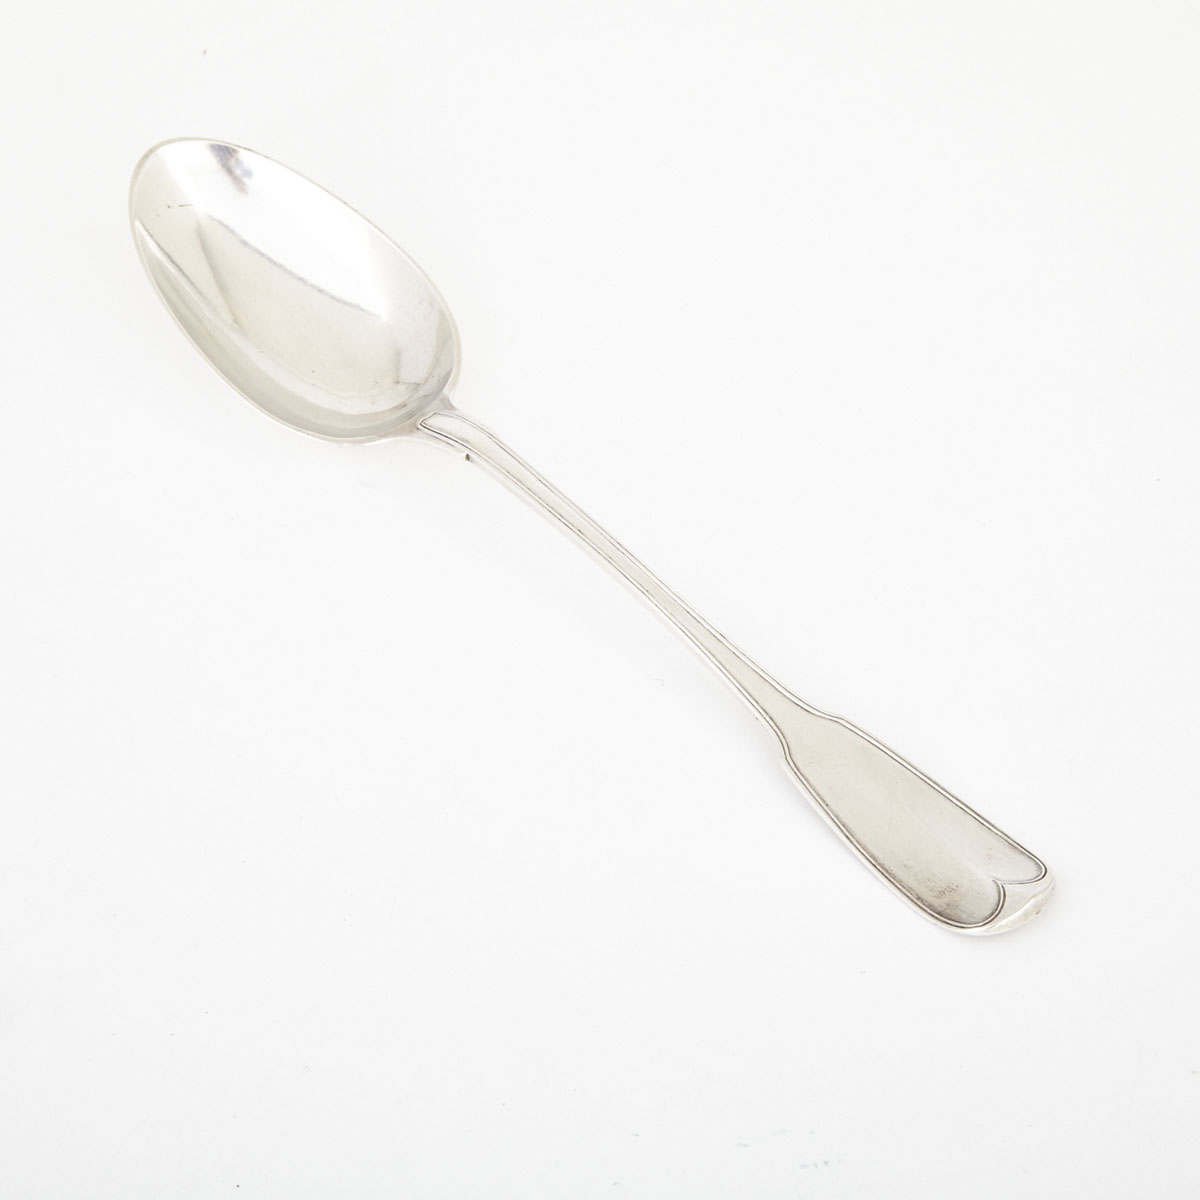 French Silver Fiddle and Thread Pattern Serving Spoon, Strasbourg,1781